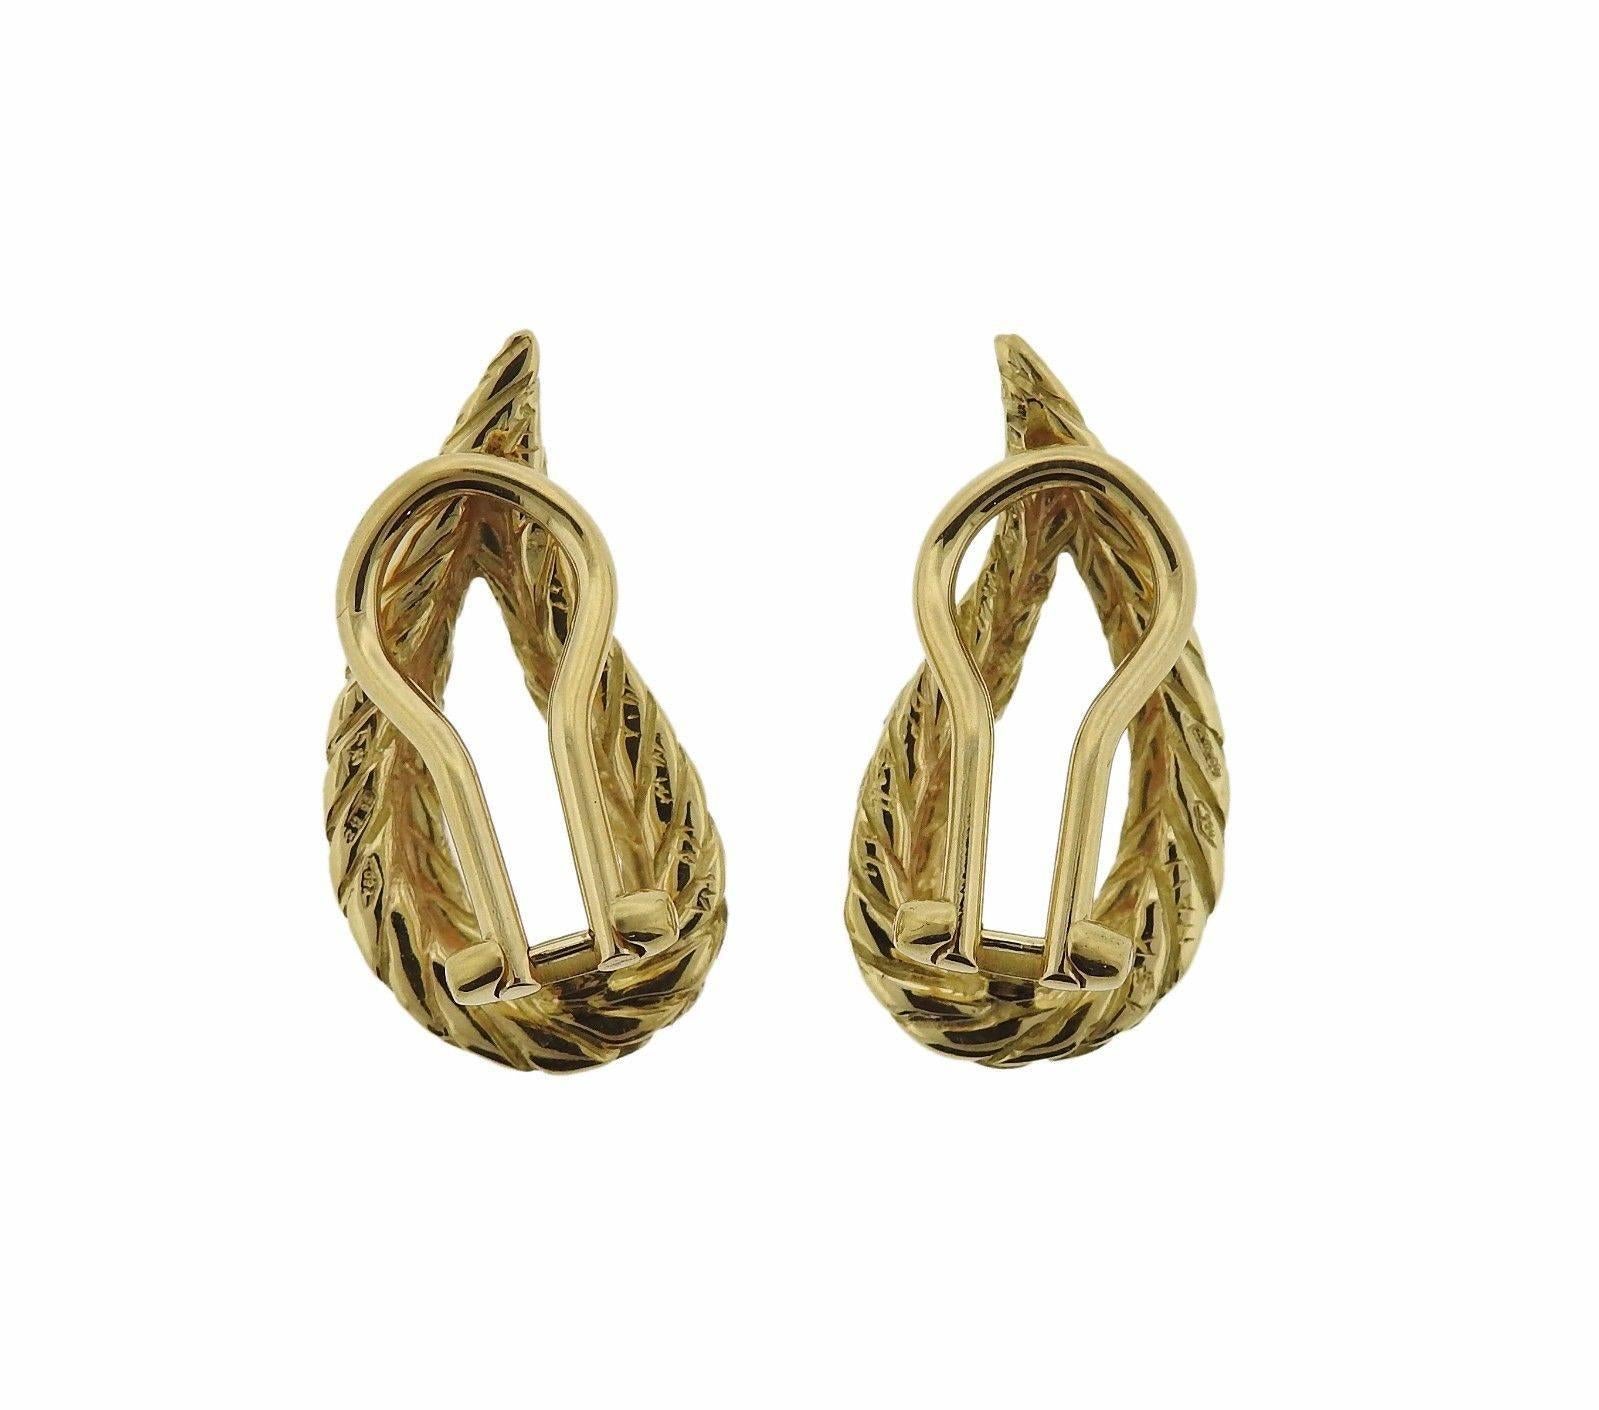 A pair of 18k gold earrings by Buccellati.  The earrings measure 23.2mm x 12.2mm and weigh 8.2 grams.  Marked: 750, Italy,  18k, Buccellati.  The earrings retail for $2950 and come with paperwork from Buccellati.